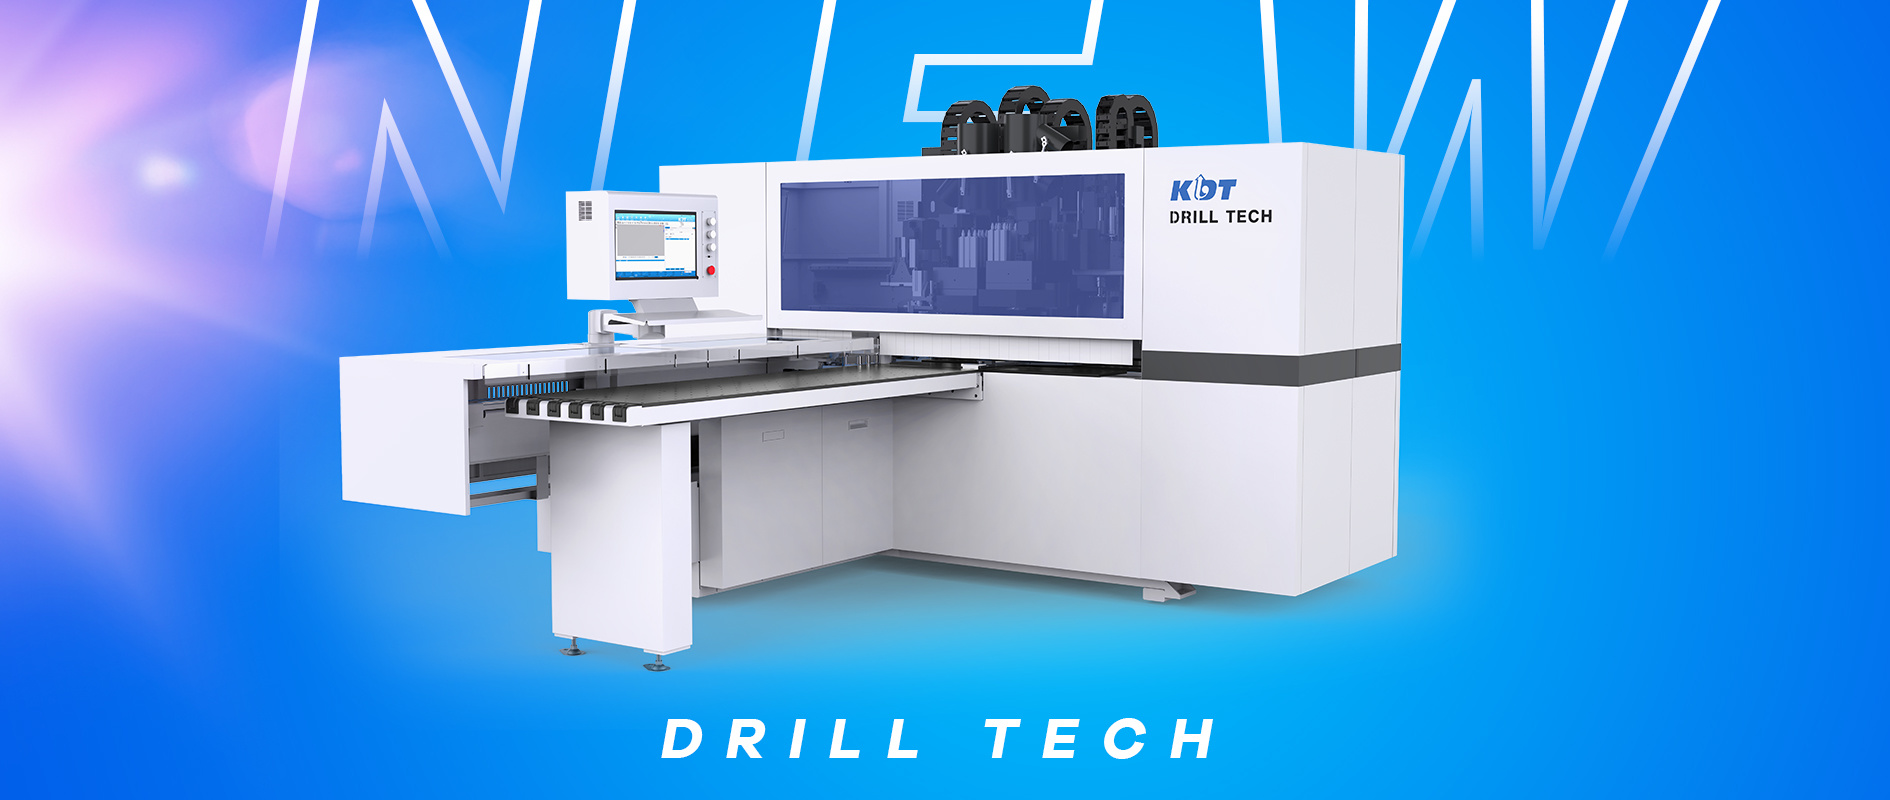 Drill Tech KD-612CSD | equips with 3 drill sets and diversified process libraries, leading to an efficient work.